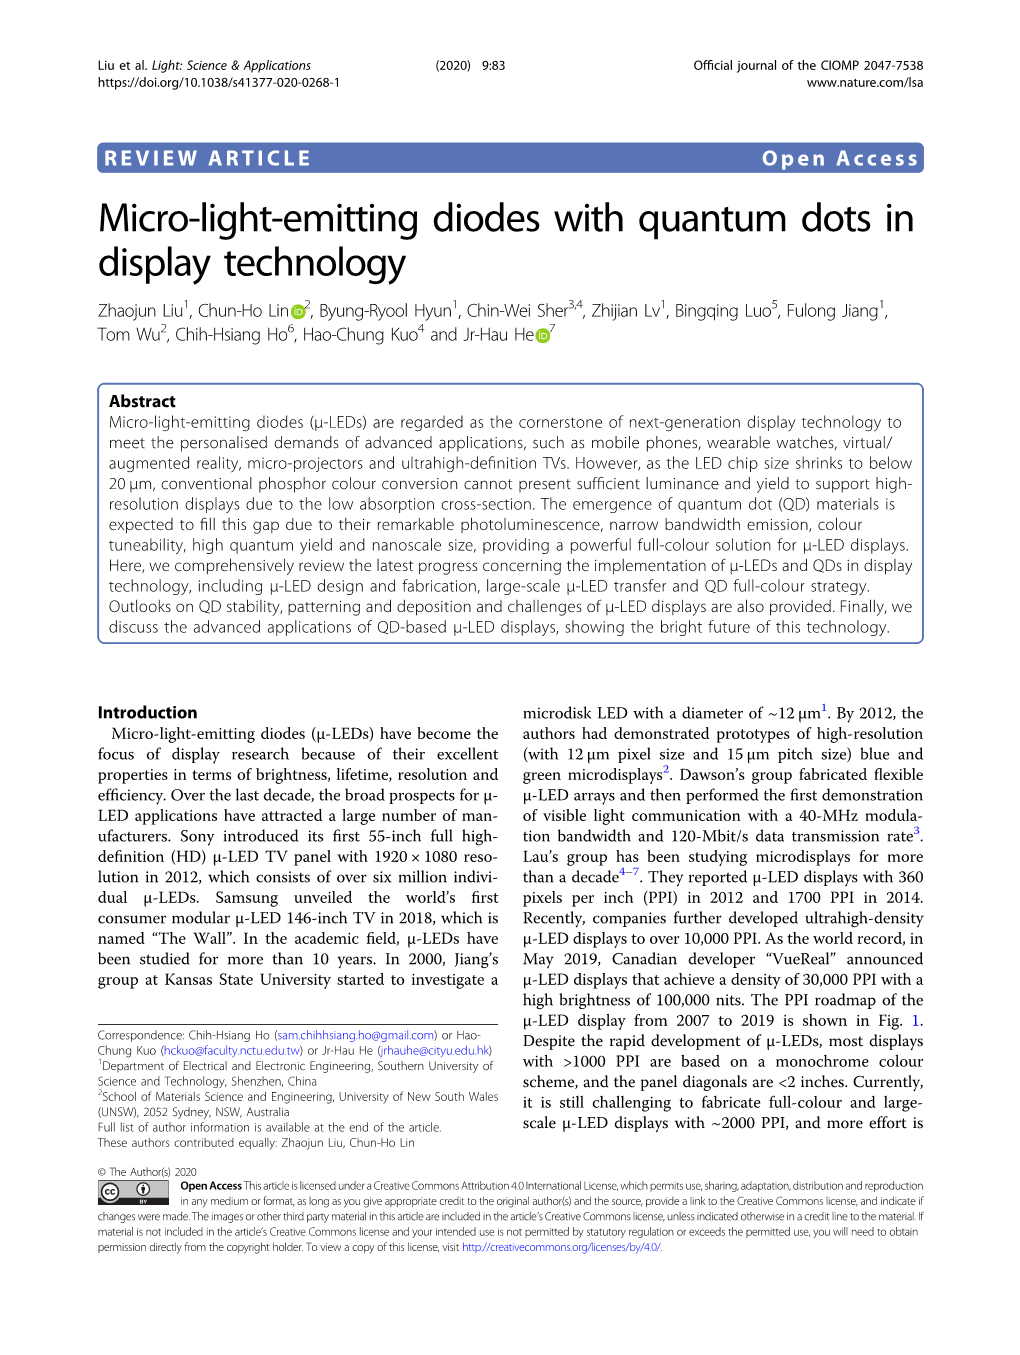 Micro-Light-Emitting Diodes with Quantum Dots in Display Technology